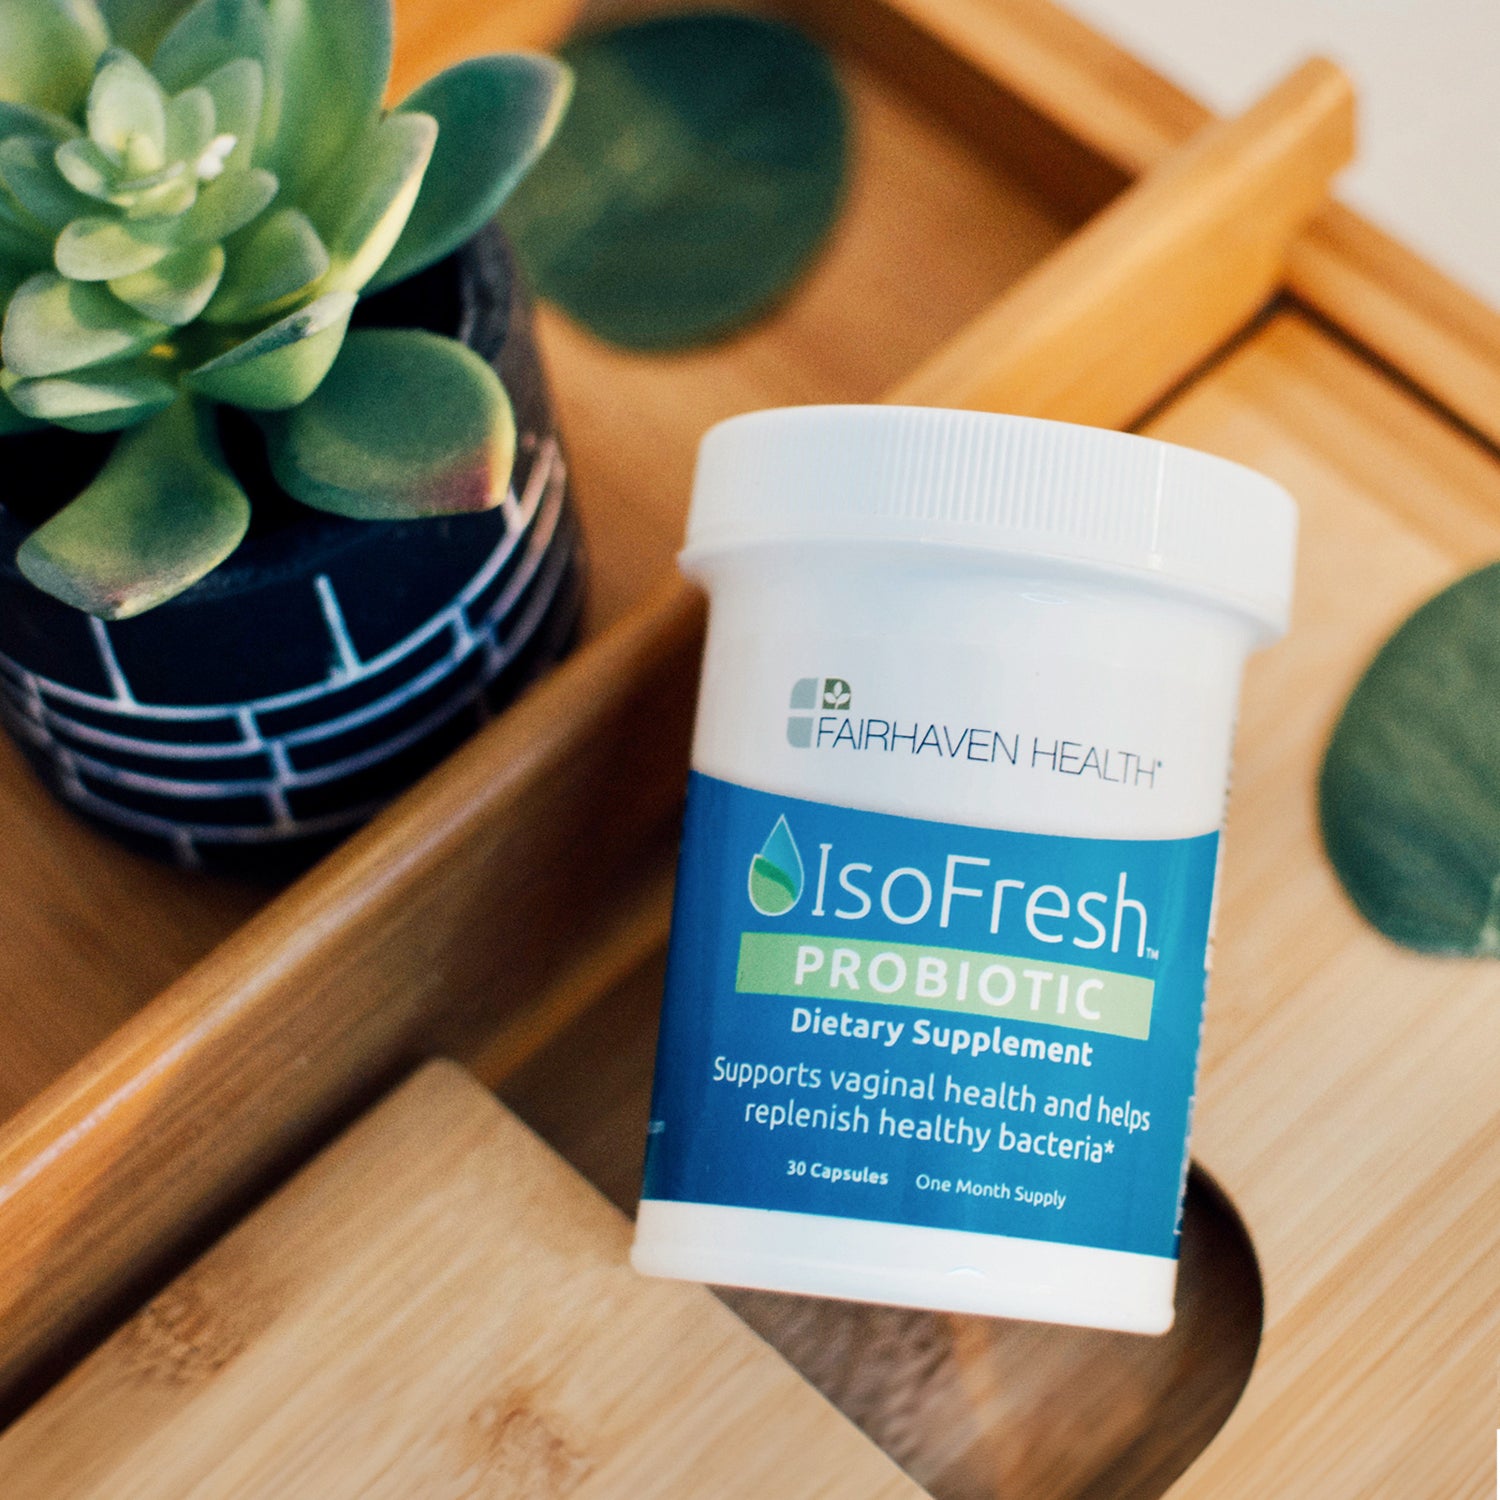 IsoFresh Probiotic - Replenishes Friendly Vaginal Bacteria